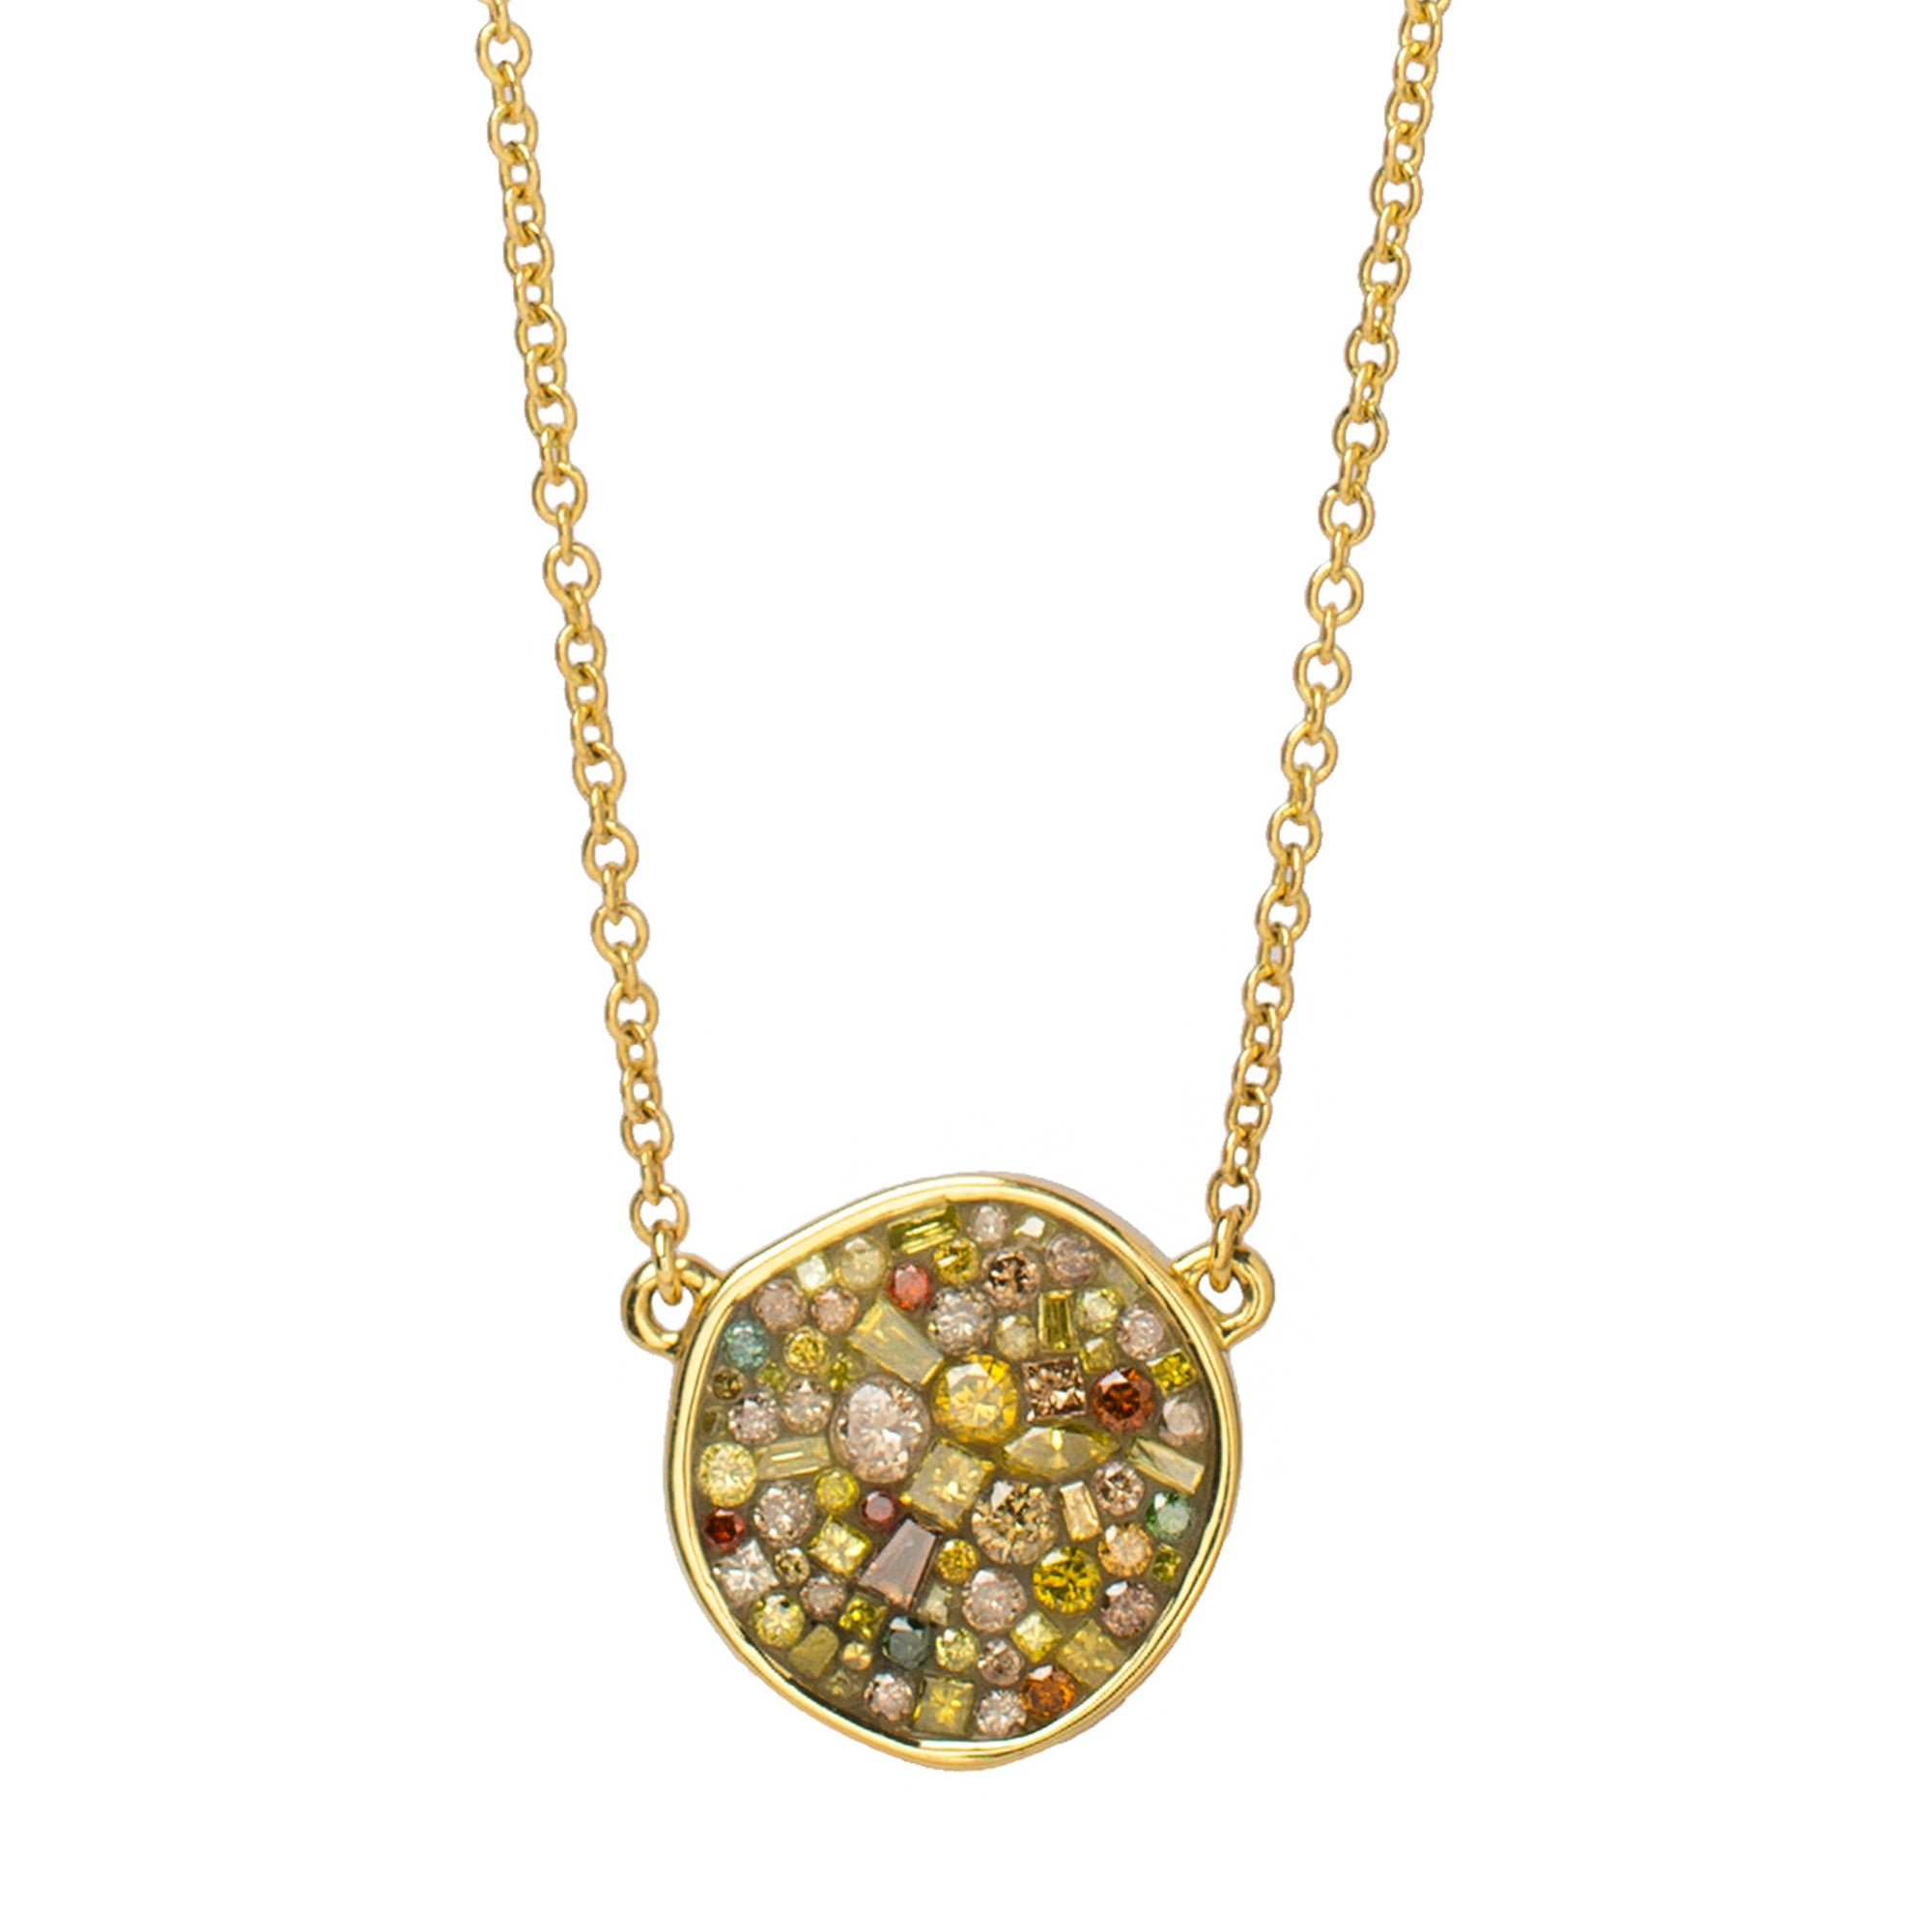 Cinnamon Pebble Diamond Necklace by Pleve available at Talisman Collection Fine Jewelers in El Dorado Hills, CA and online. Specs: 18k yellow gold; color enhanced diamonds 1.20 cts.